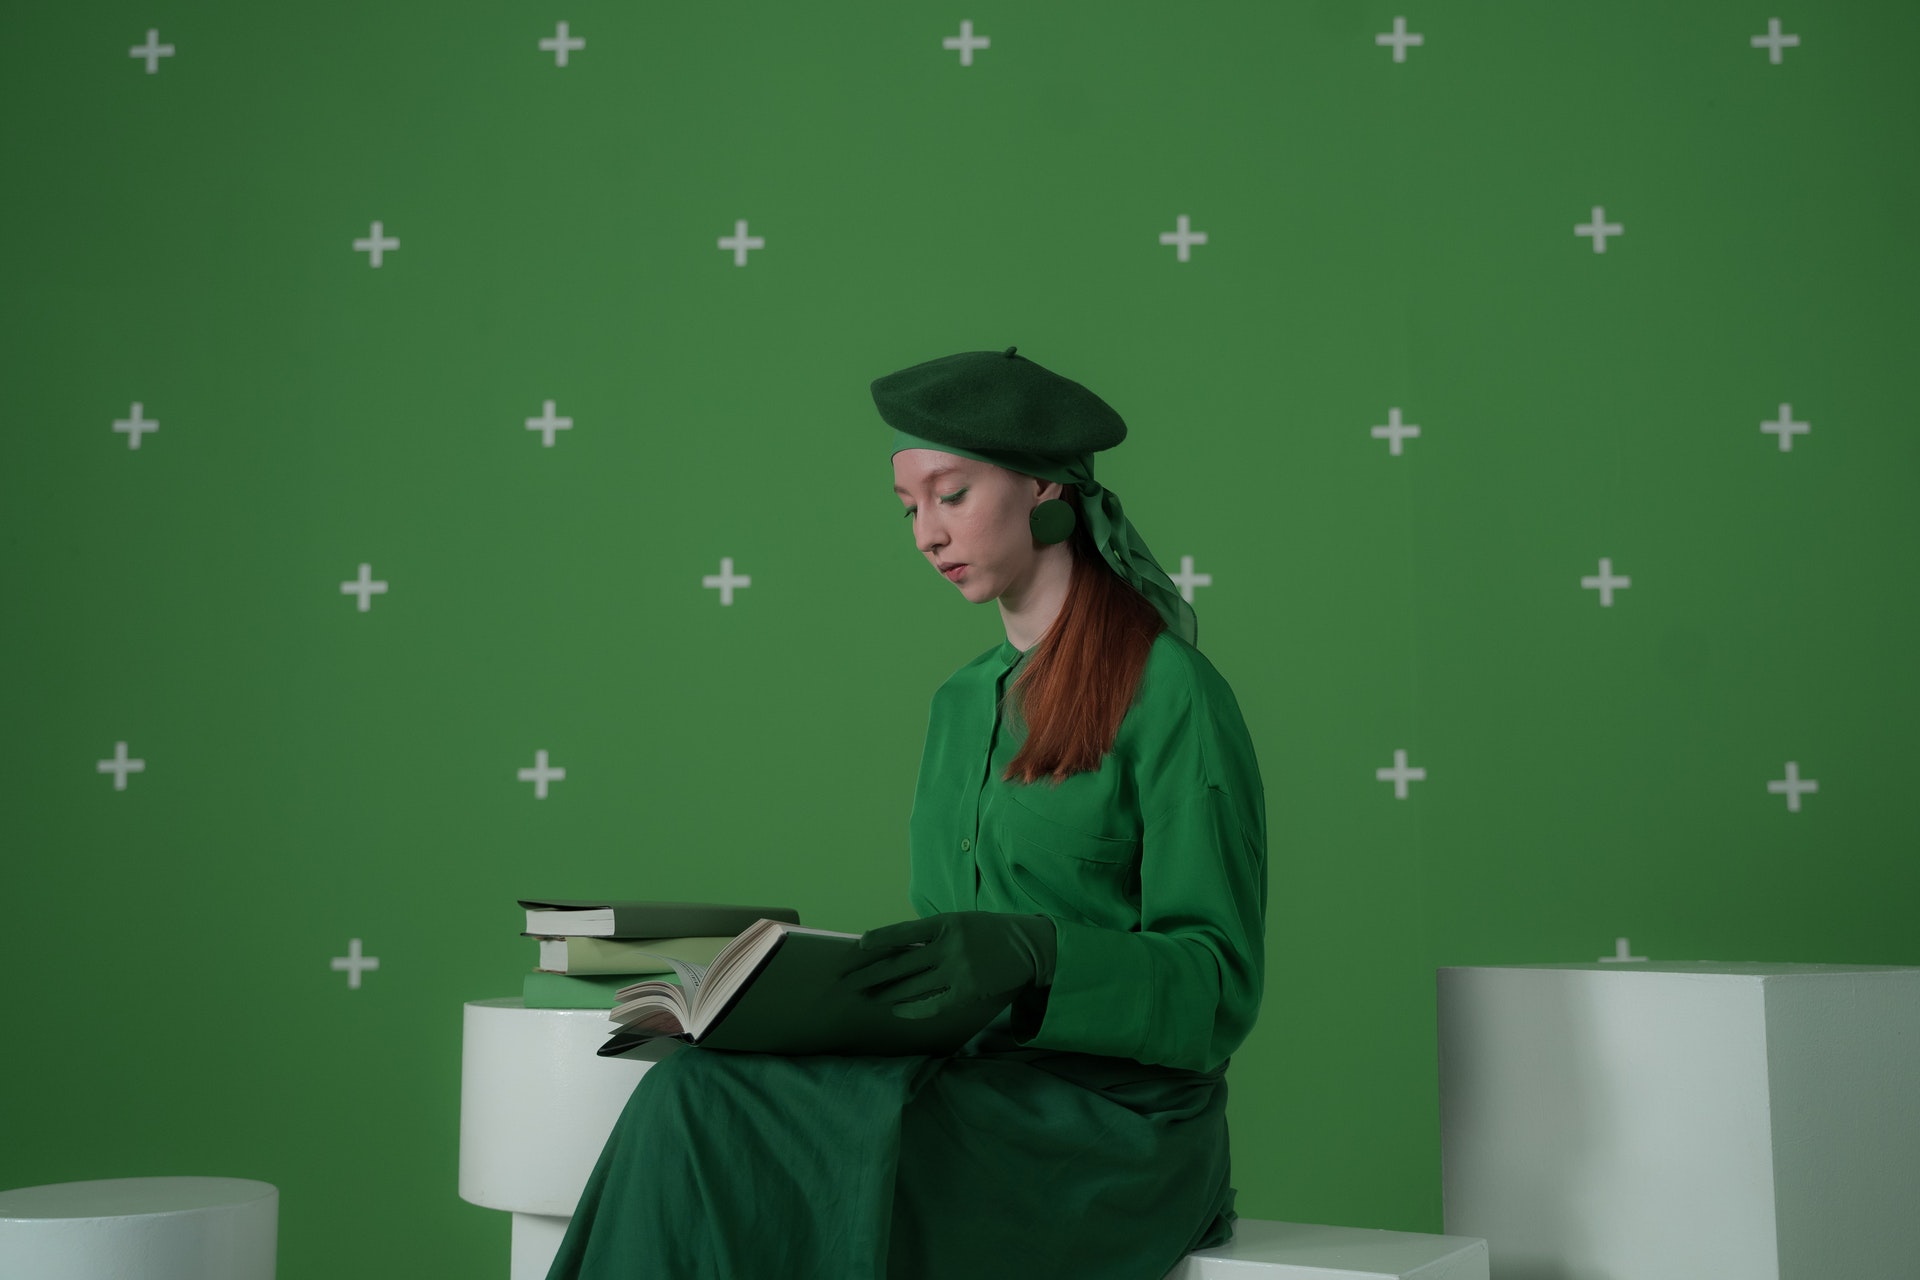 Smart Tips for Using a Green Screen Background Successfully